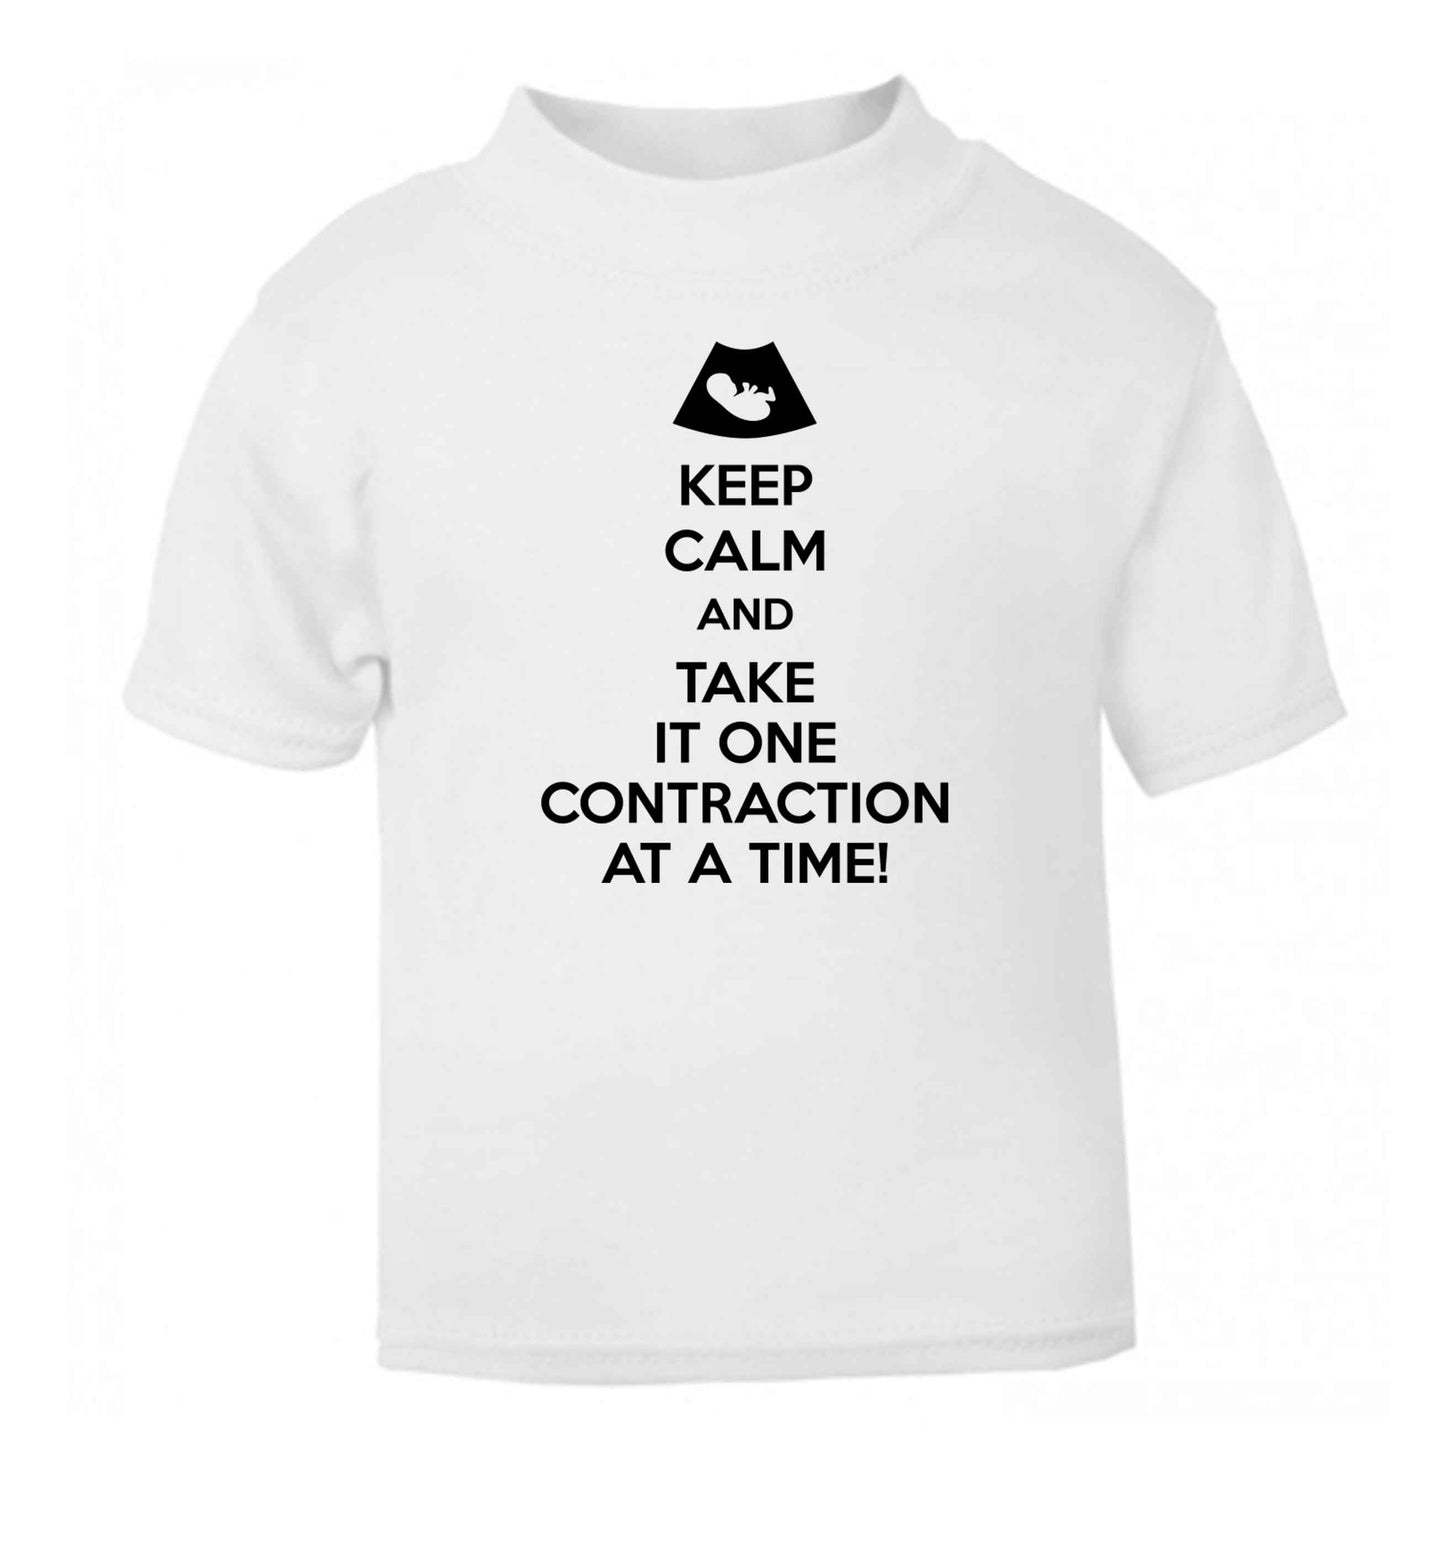 Keep calm and take it one contraction at a time white Baby Toddler Tshirt 2 Years